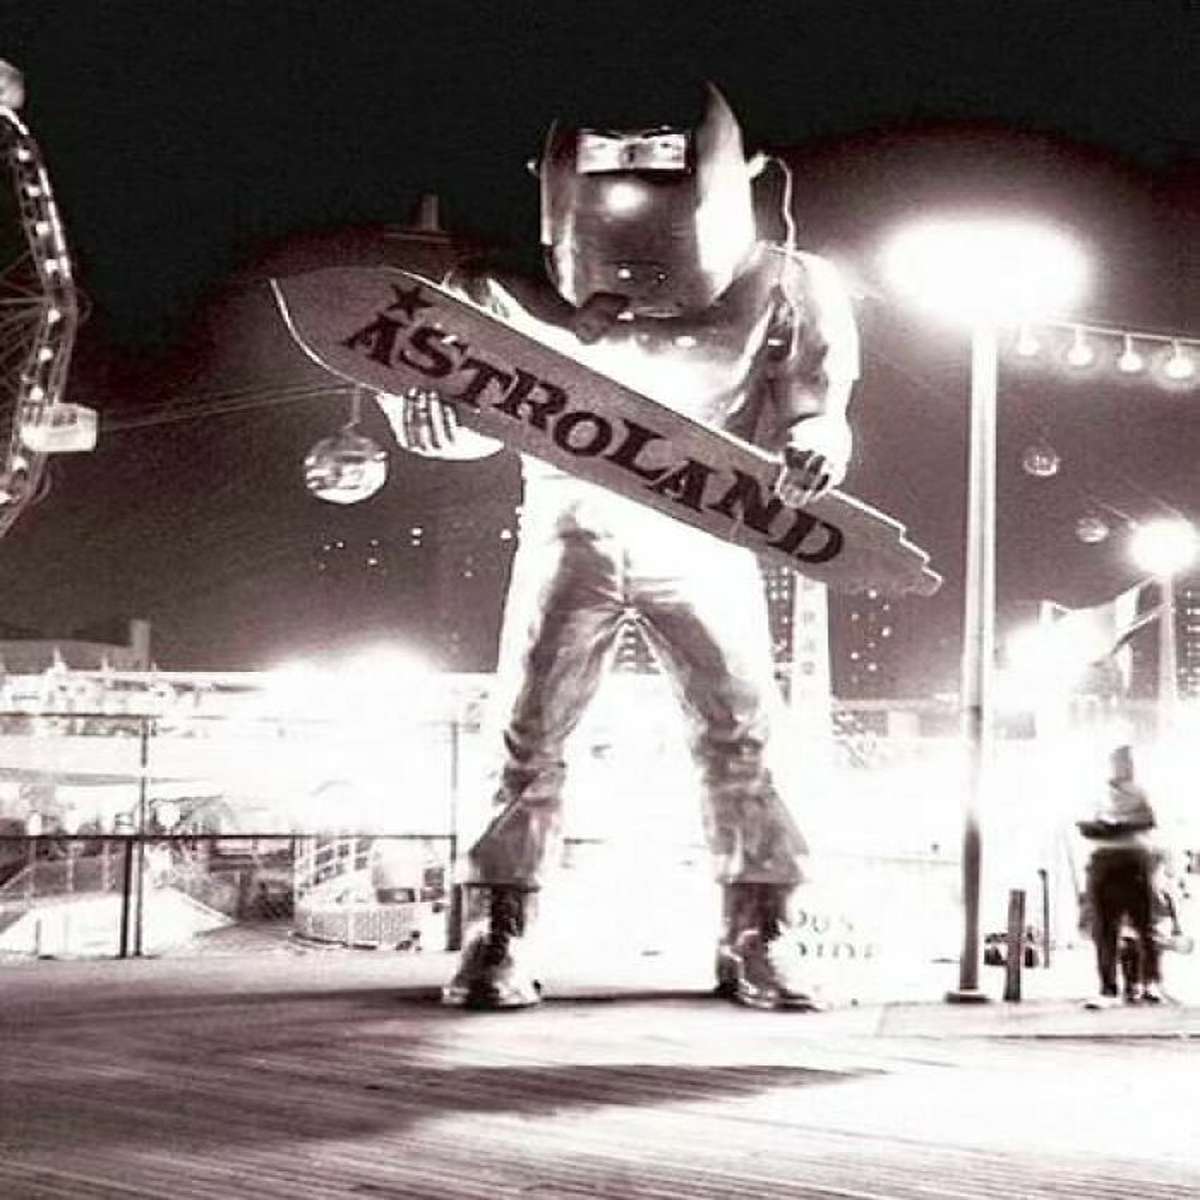 Astroman At Astroland. Astroland Was The First Space Age Theme Park. It Was Located On Coney Island, Brooklyn, New York, Opening In 1962 It Was Formally Closed On September 7, 2008